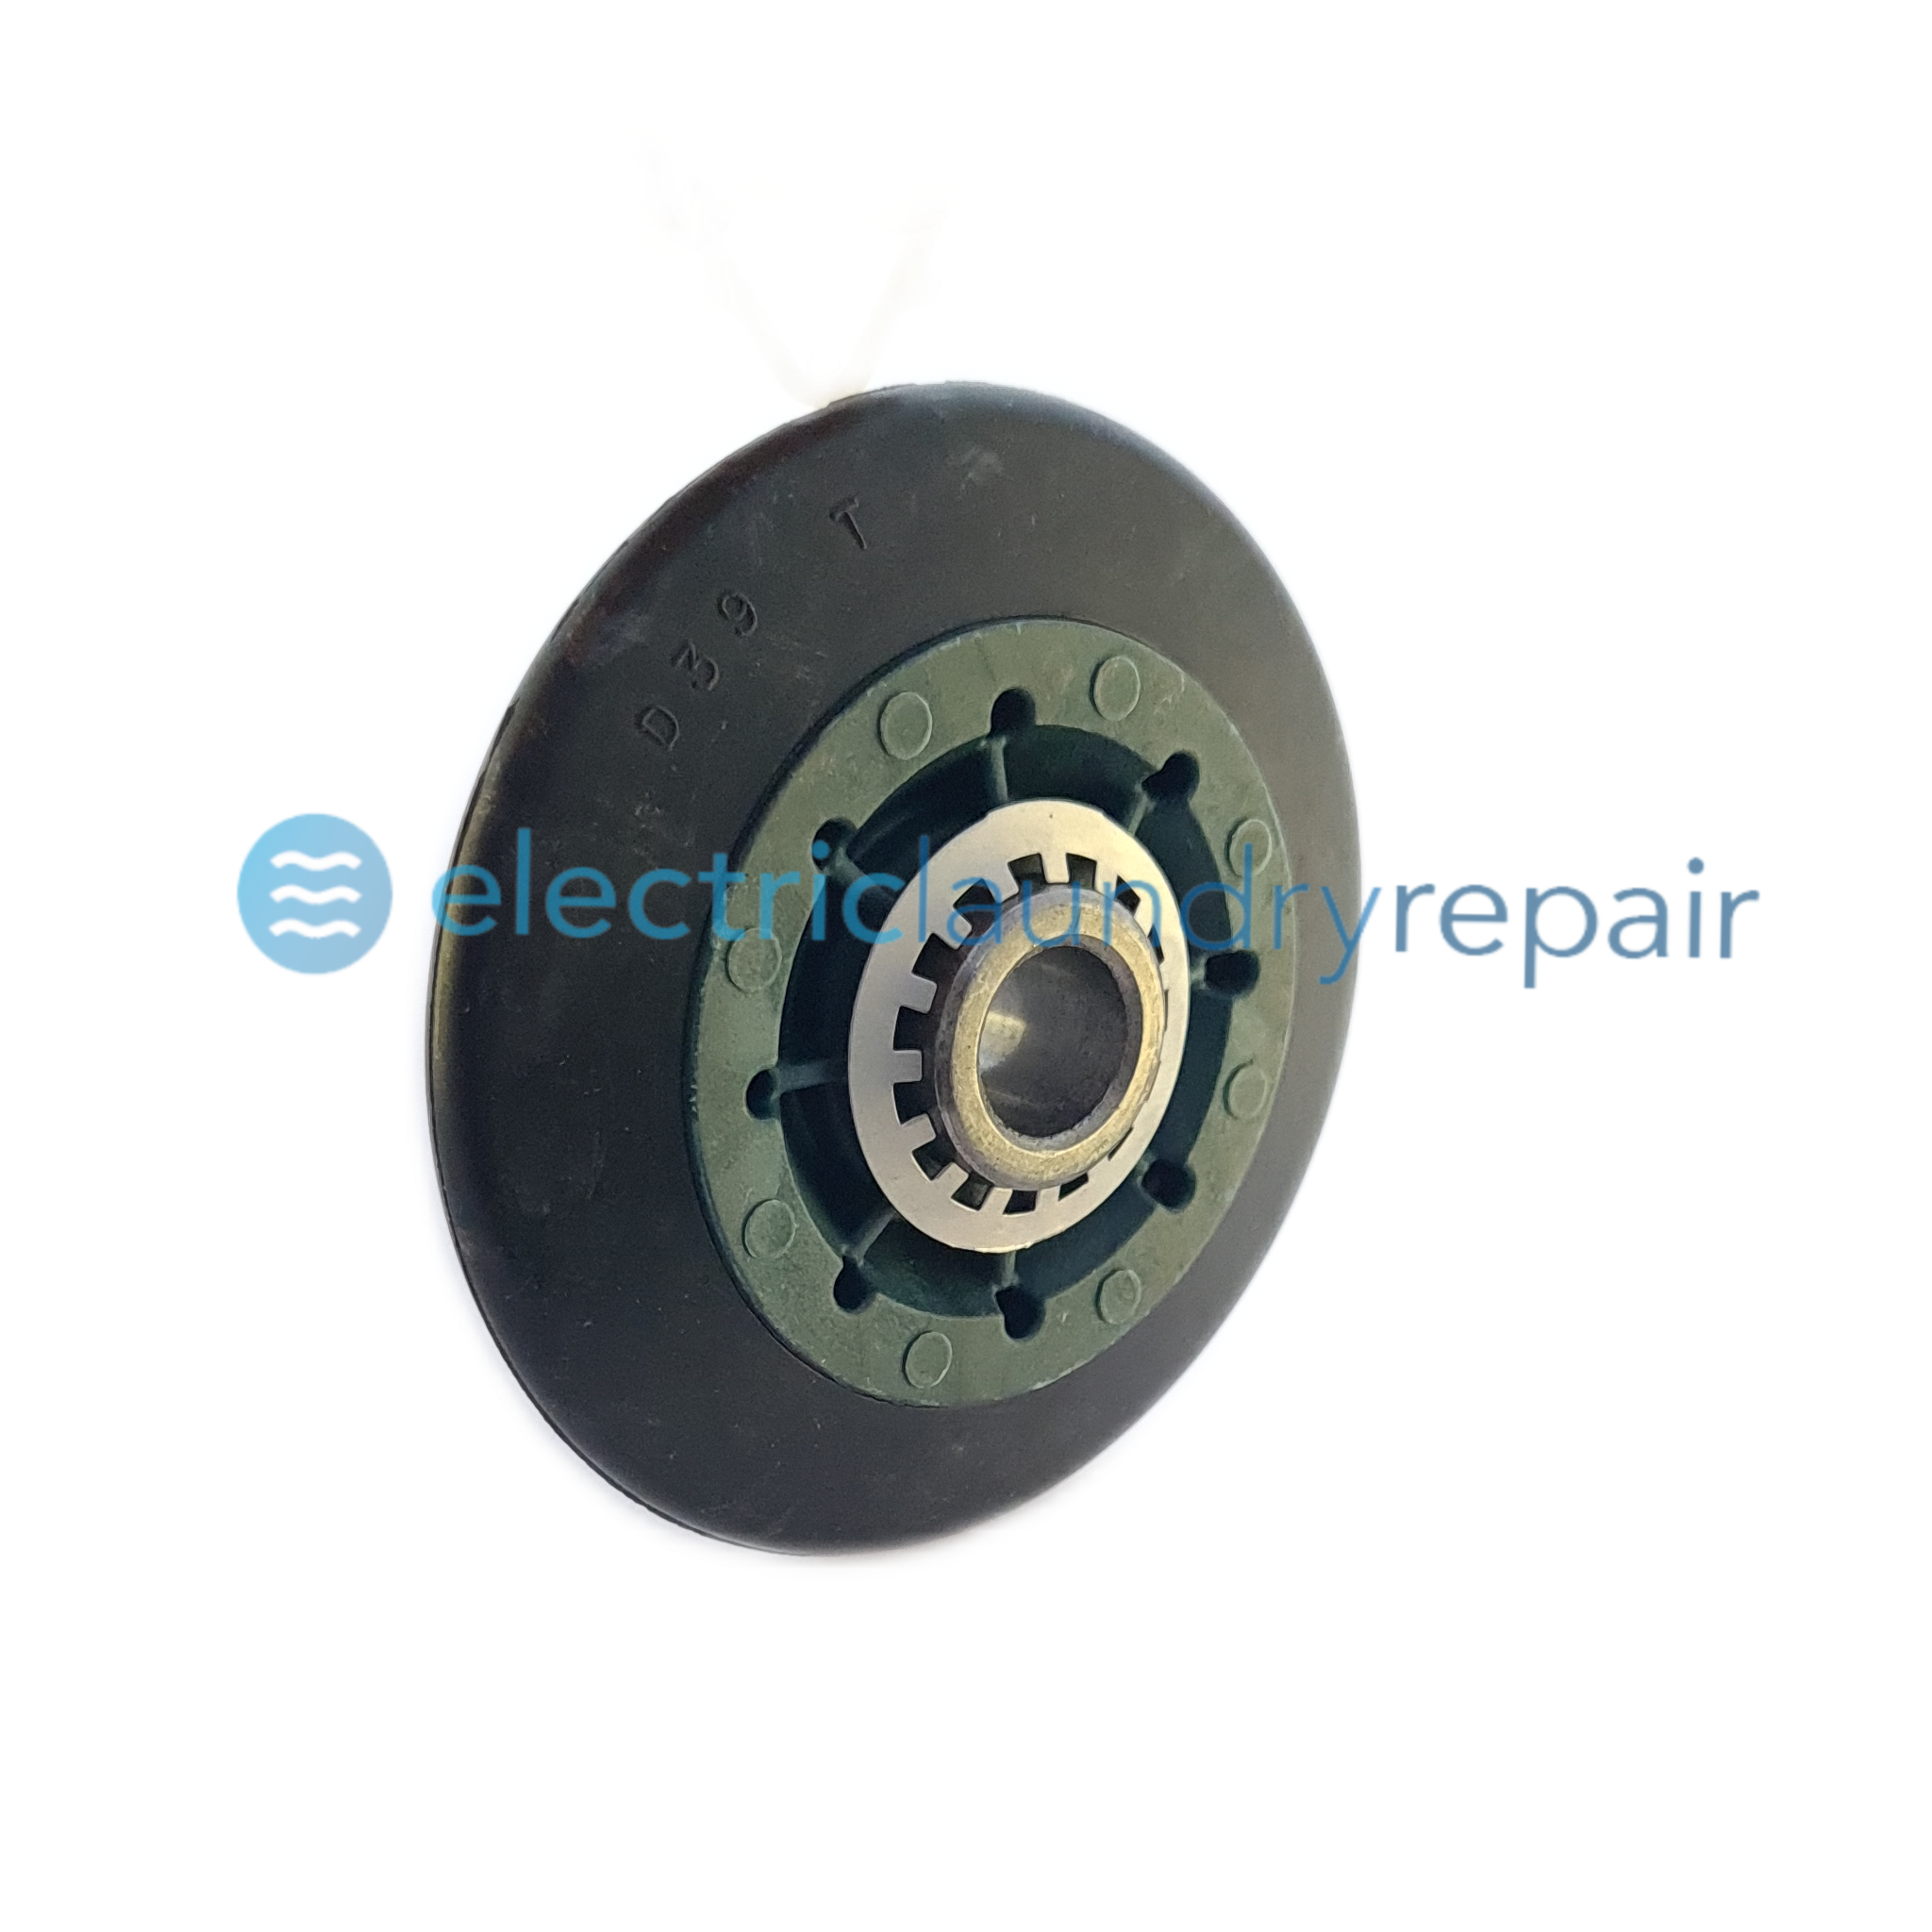 Maytag Dryer Roller, Drum Support Replacement Part www.electriclaundryrepair.co.nz